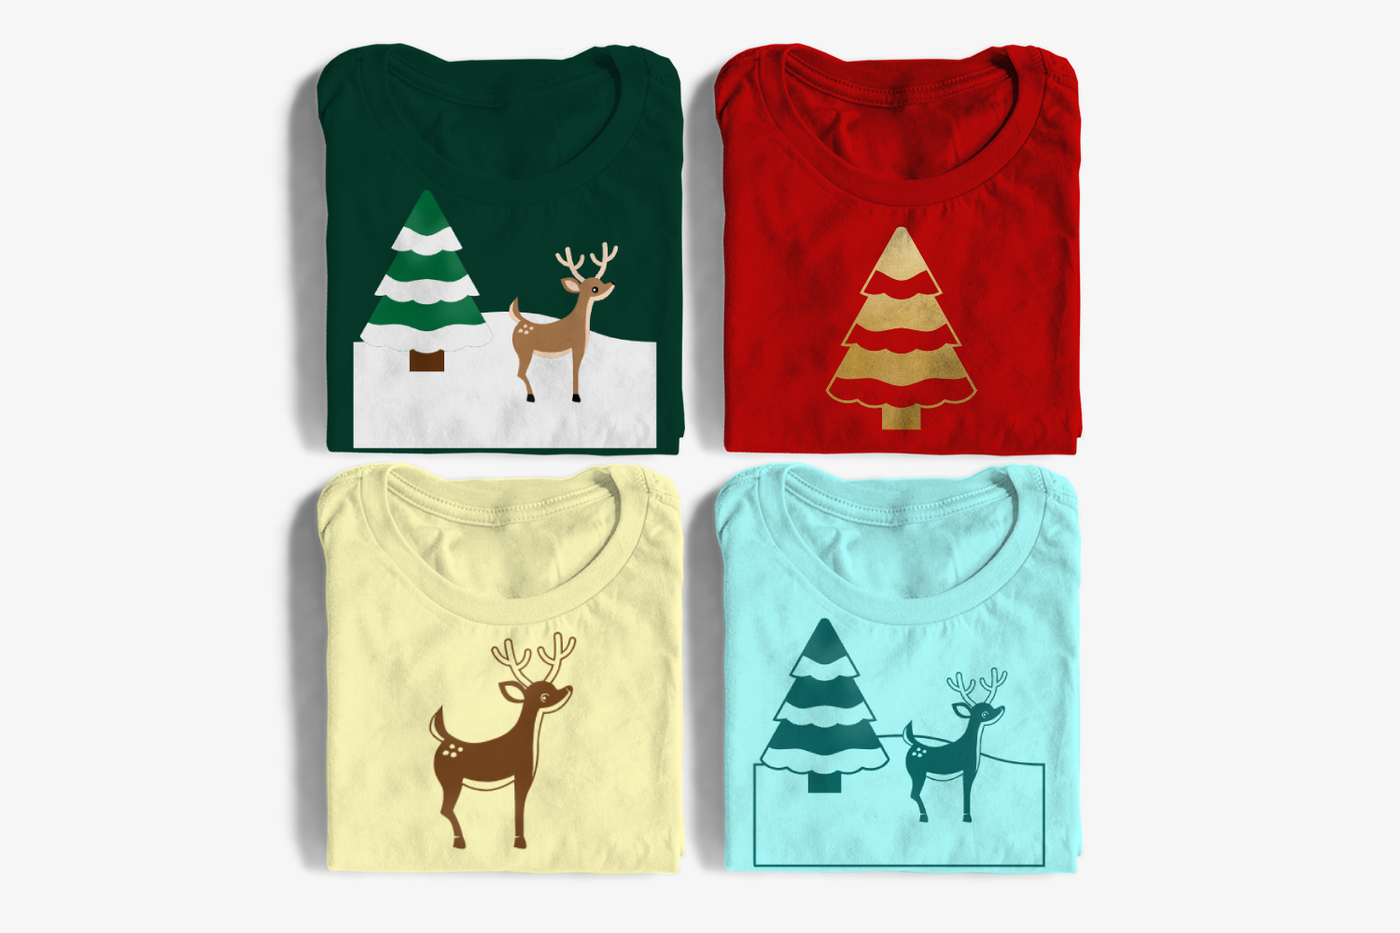 For folded tees. The top left and bottom right have a deer standing in snow with a snow capped tree. One is full color, the other has a single color version of the design. The top right has a snow capped tree. The bottom left has a deer..